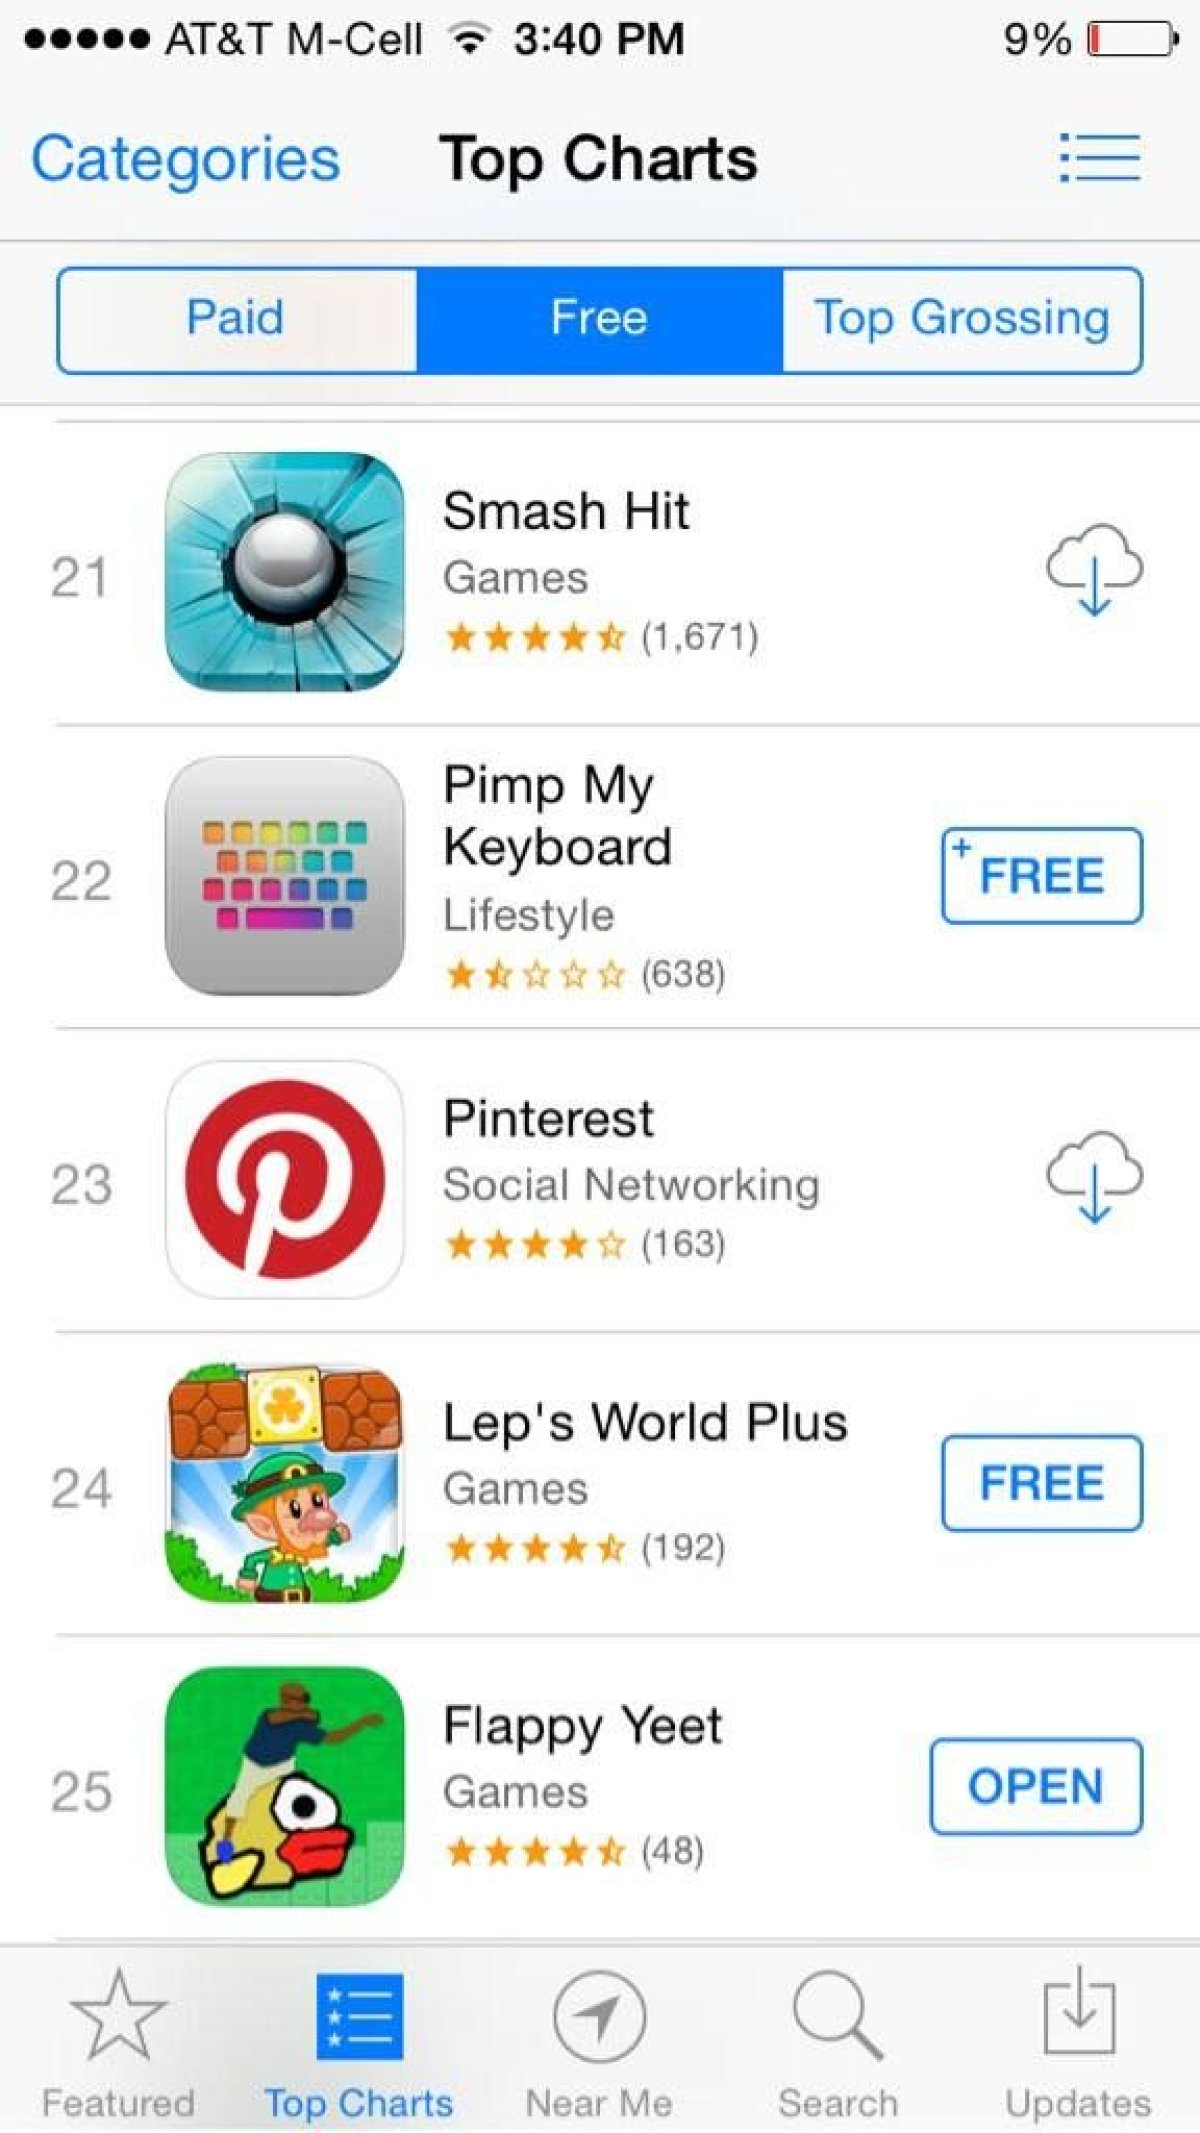 Flappy Yeet Made Top 25 Charts On iTunes